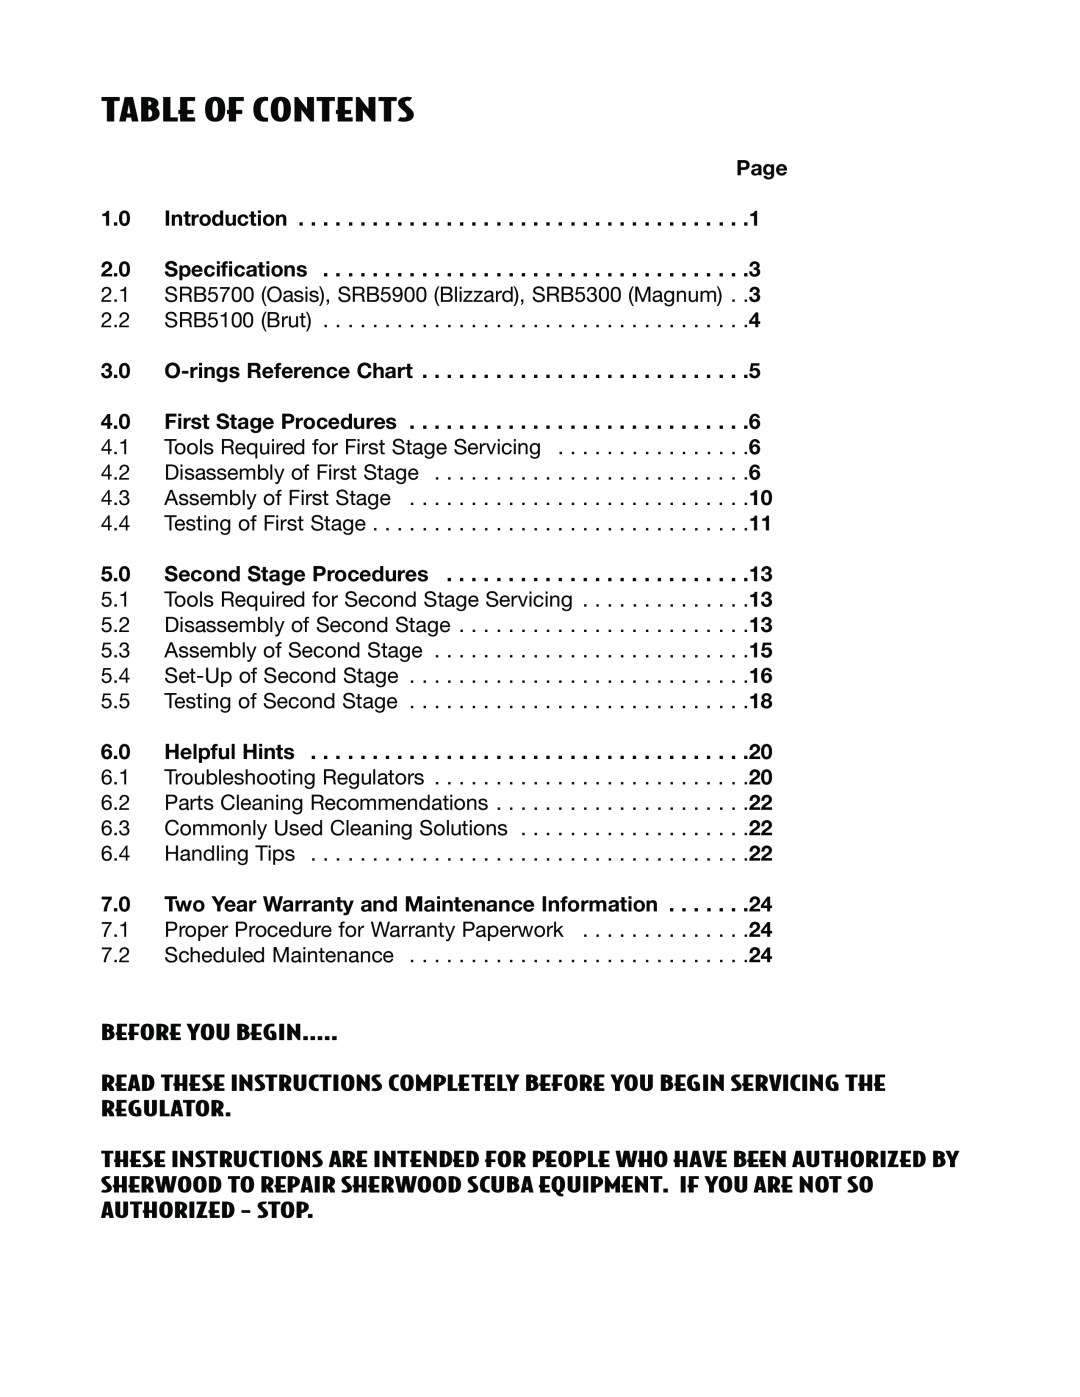 Sherwood SRB5300 manual Table Of Contents, Page 1.0 Introduction 2.0 Specifications, O-rings Reference Chart, Helpful Hints 